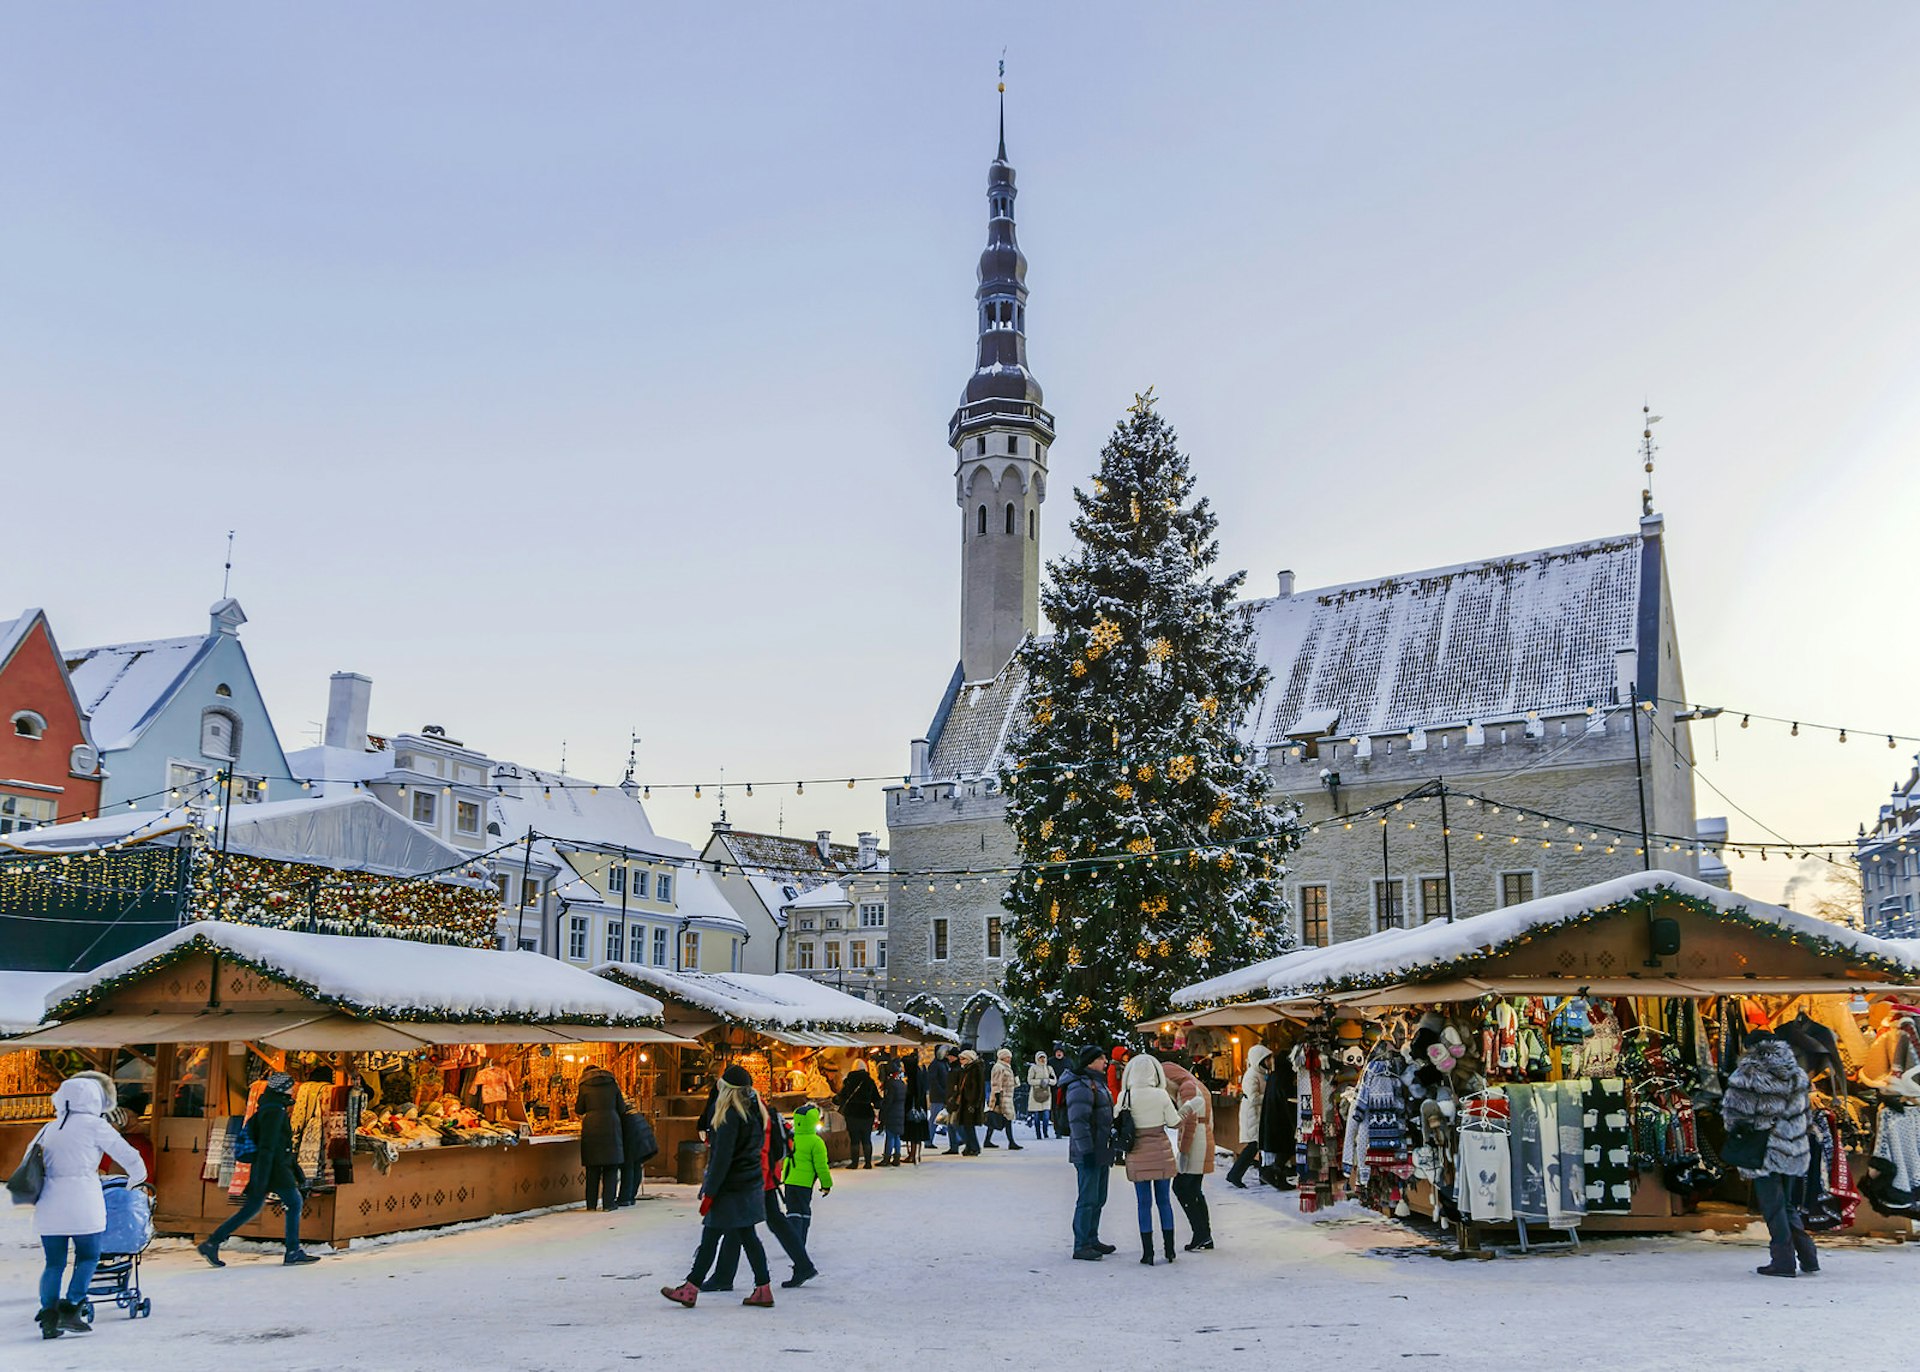 Tallinn's Town Hall Square dusted in snow during its annual Christmas Market 